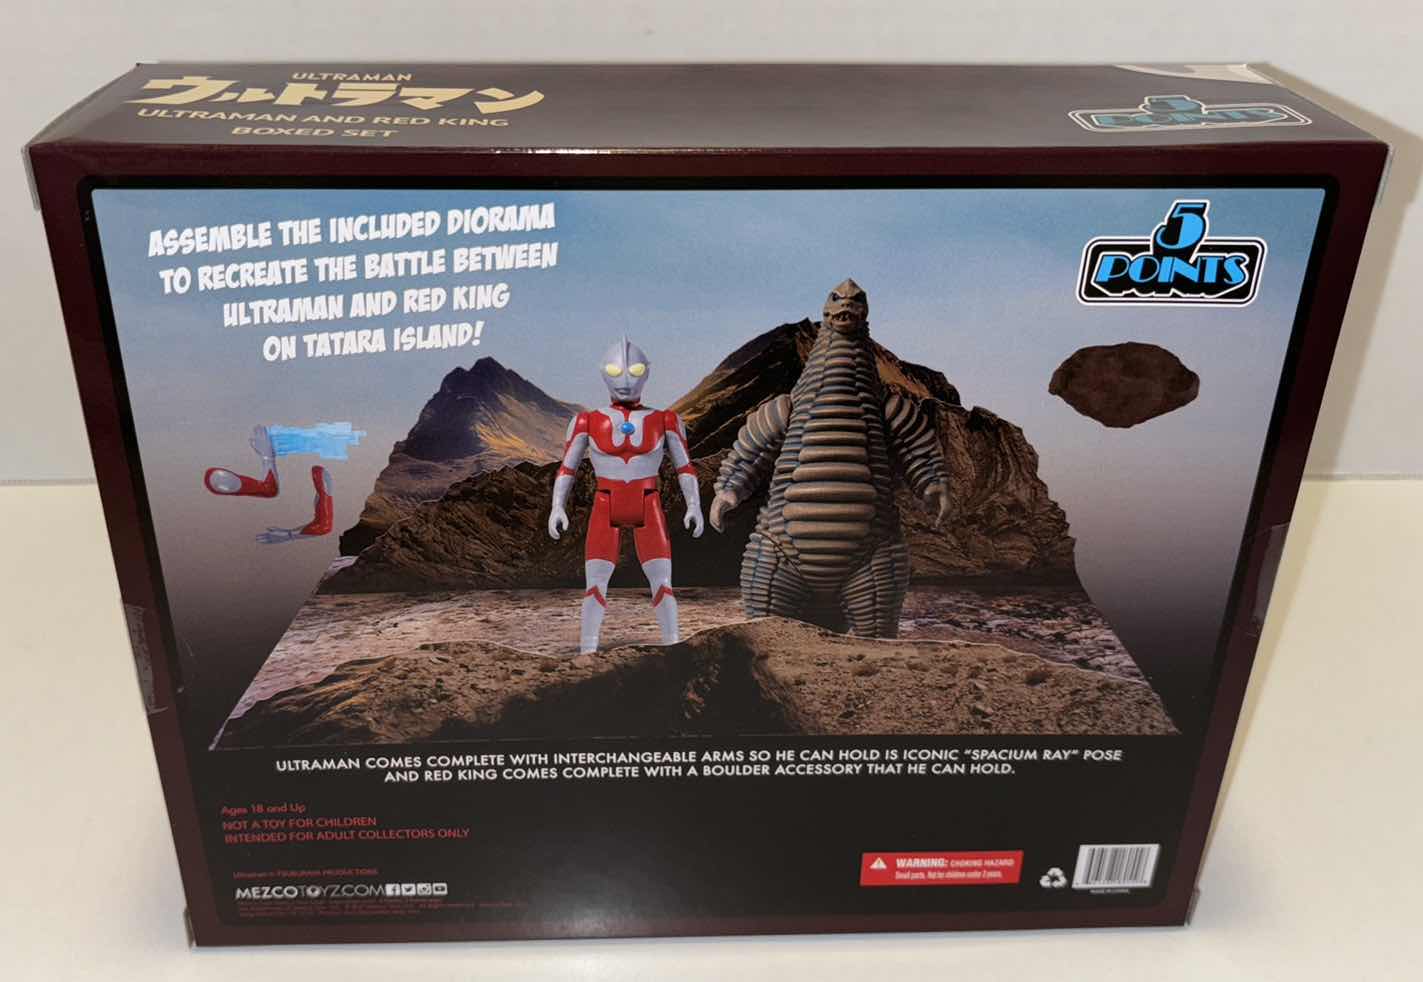 Photo 5 of NEW MEZCO TOYZ 5 POINTS ULTRAMAN AND RED KING BOXED SET (3-PACK)